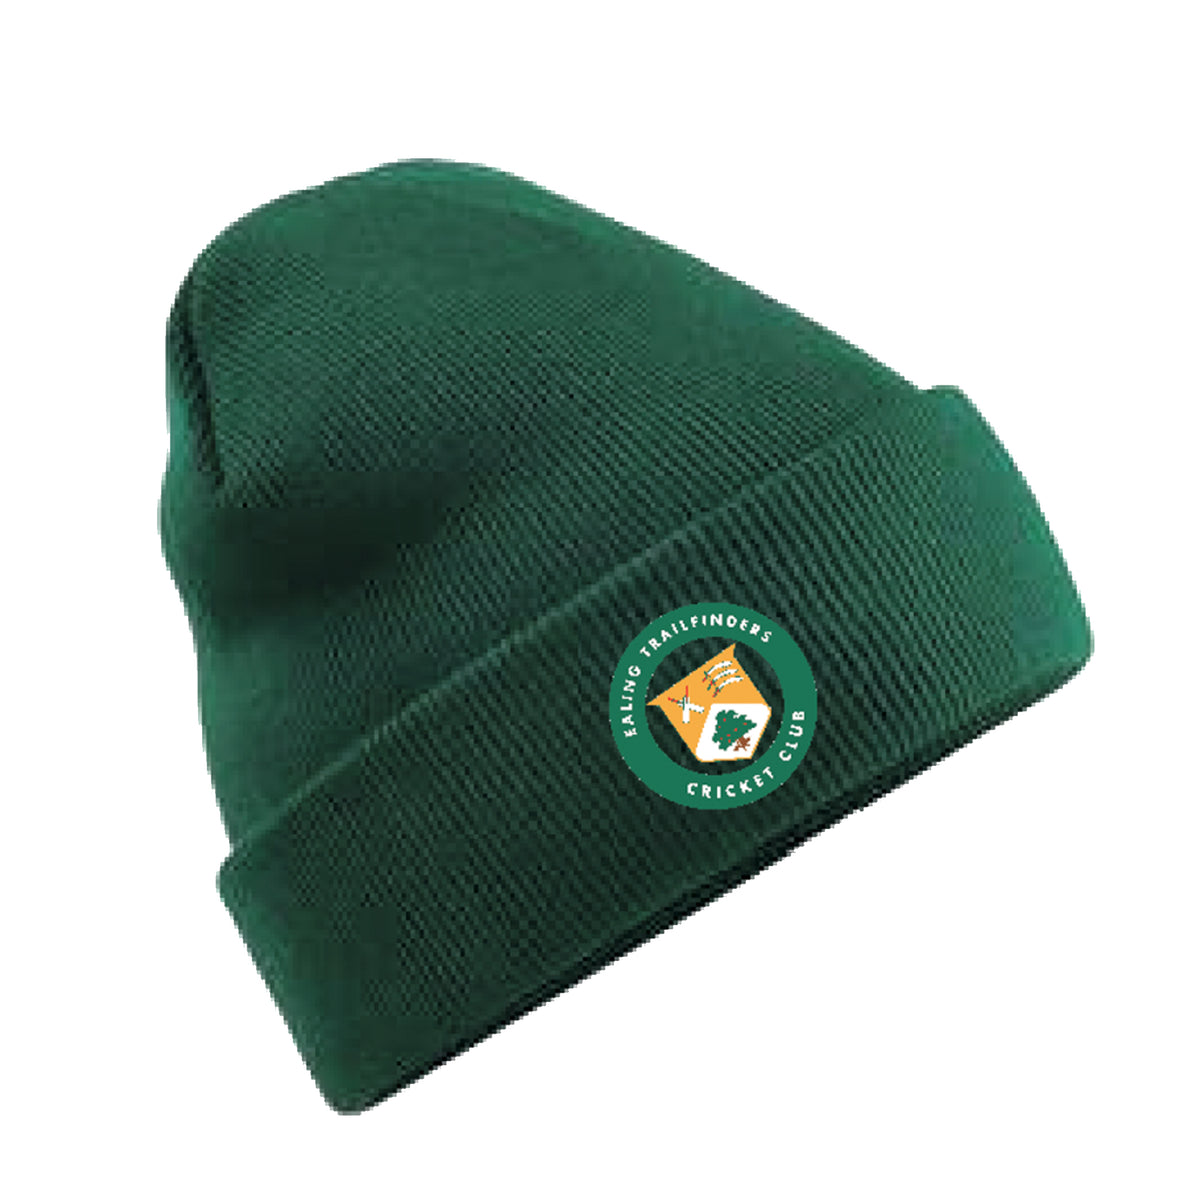 Ealing Trailfinders CC Beanie with Embroidered Logo